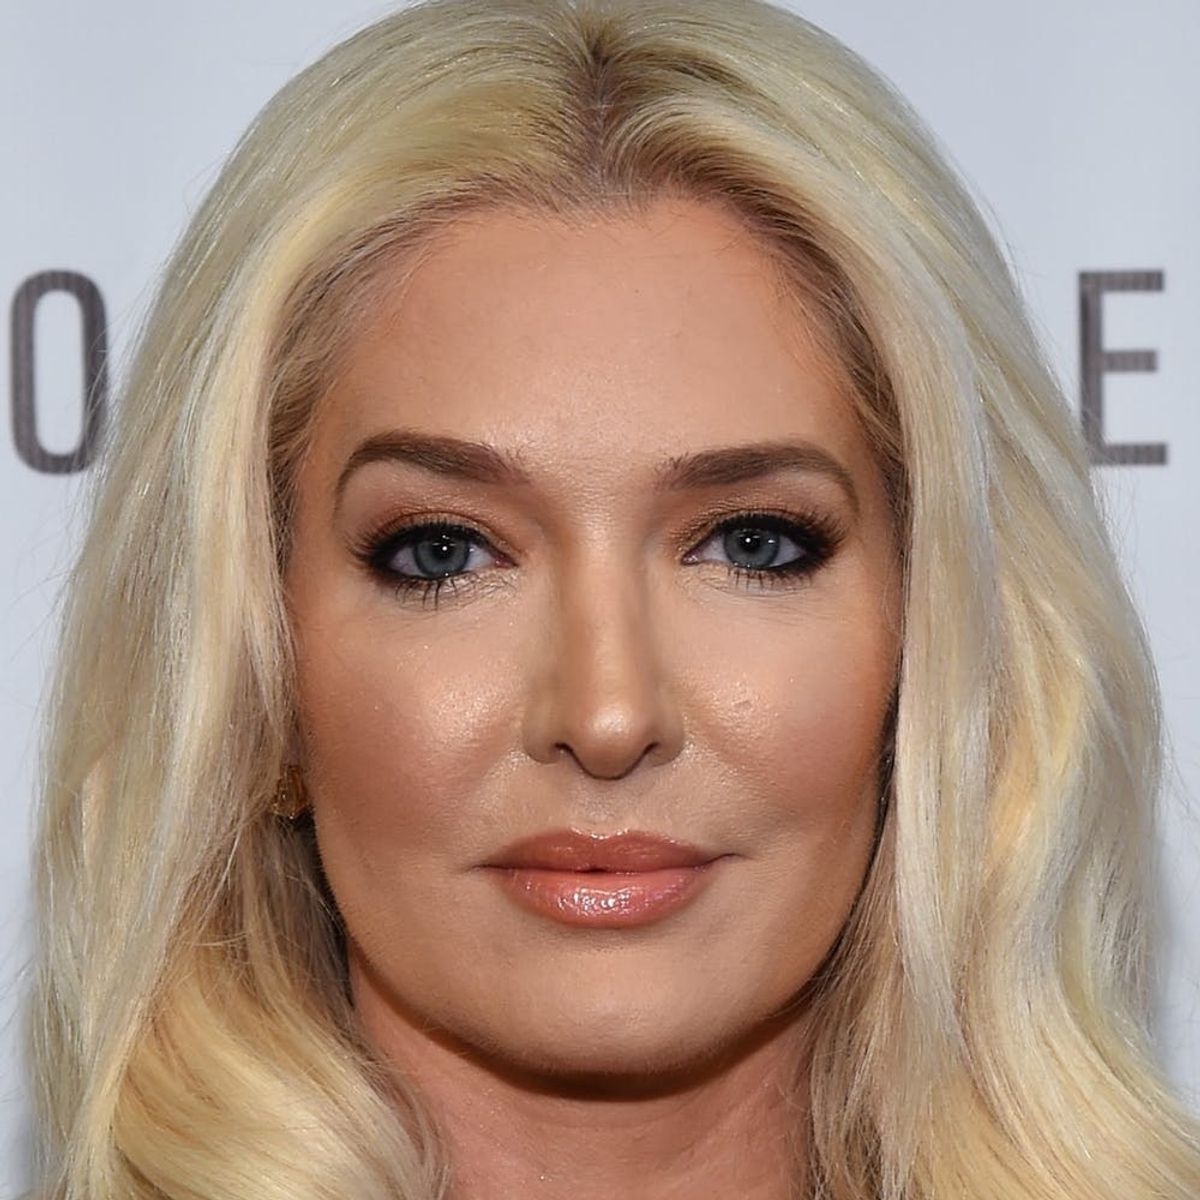 Erika Jayne Reveals the Contents of Her Beauty Bag